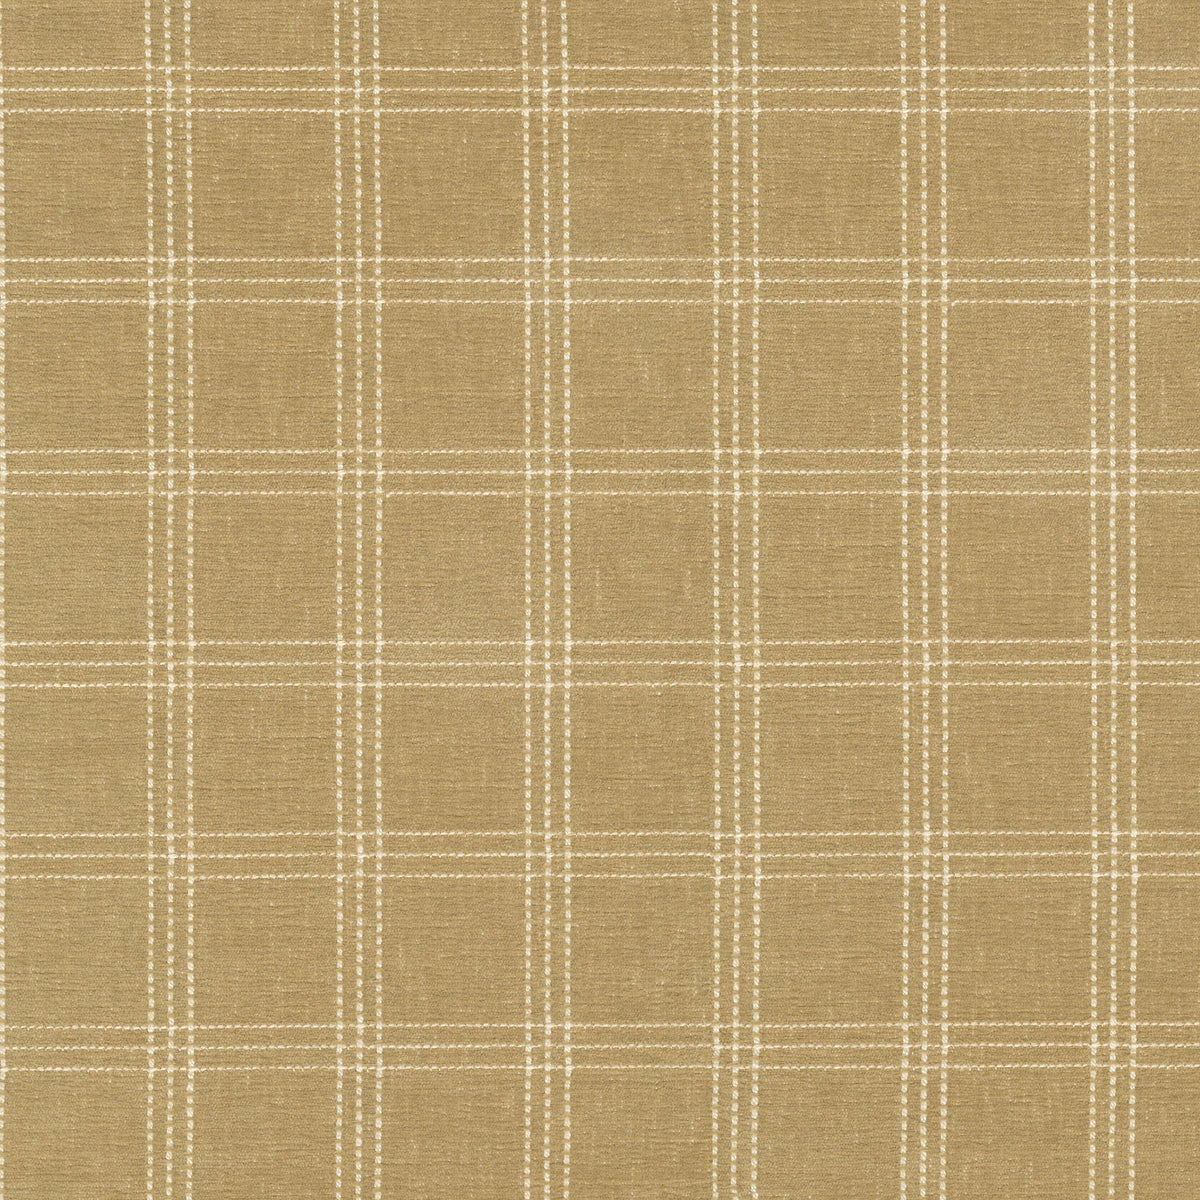 P/K Lifestyles Catalina Check -  Camel 470614 Upholstery Fabric